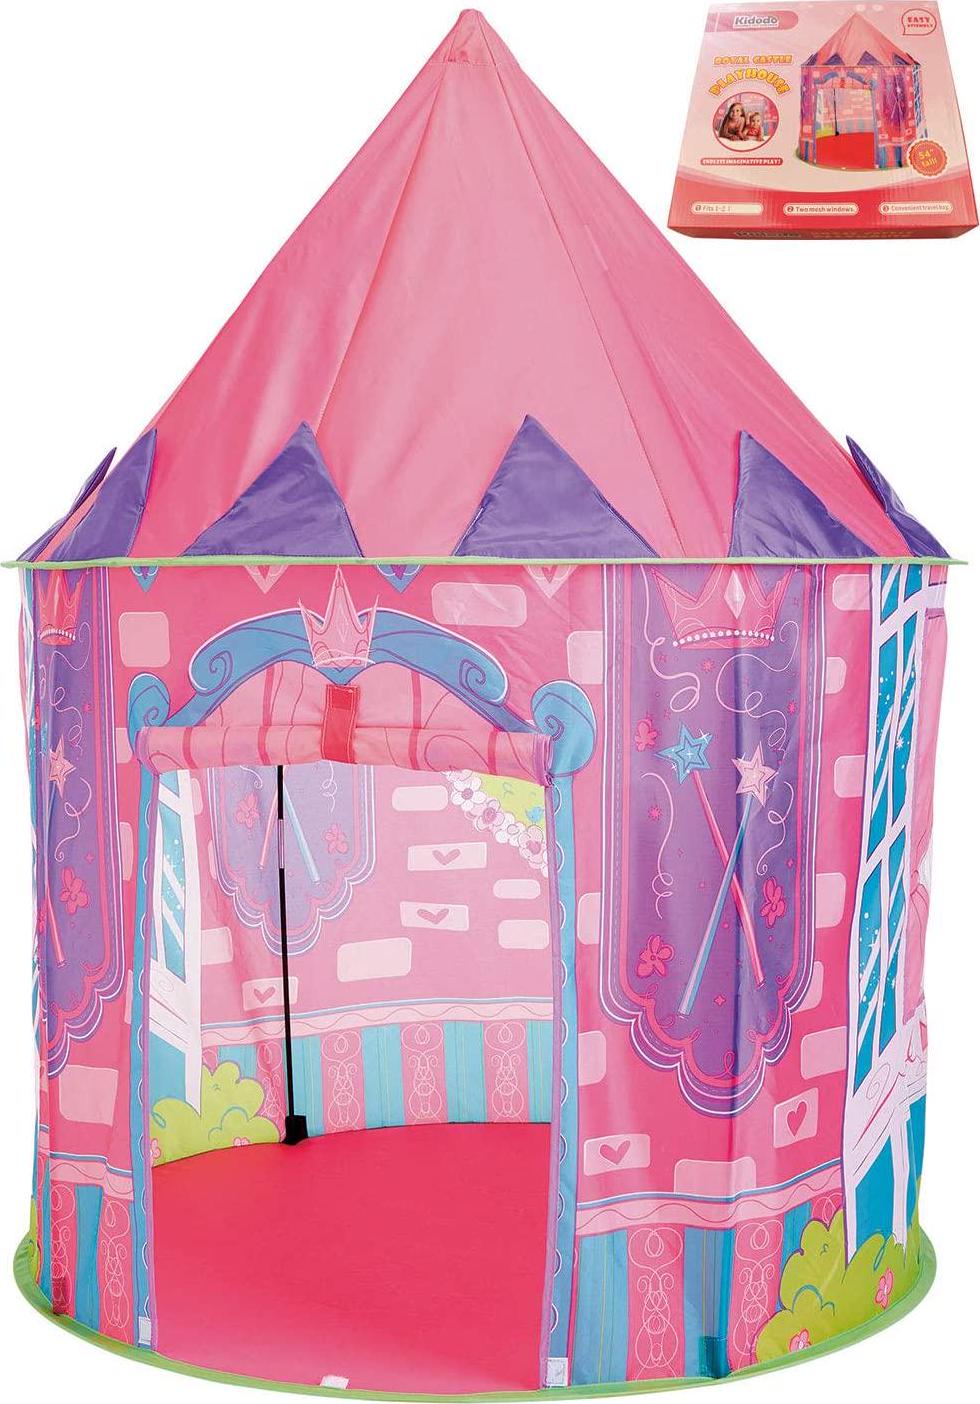 Kidodo, Kidodo Play Tent for Kids Toy Children. Pop Up Tent for Kids. Princess Castle for Kids. Portable Foldable Play Teepee Indoor or Outdoor Garden Playhouse Tent Carry Bag for Children Boys Girls Toddler.